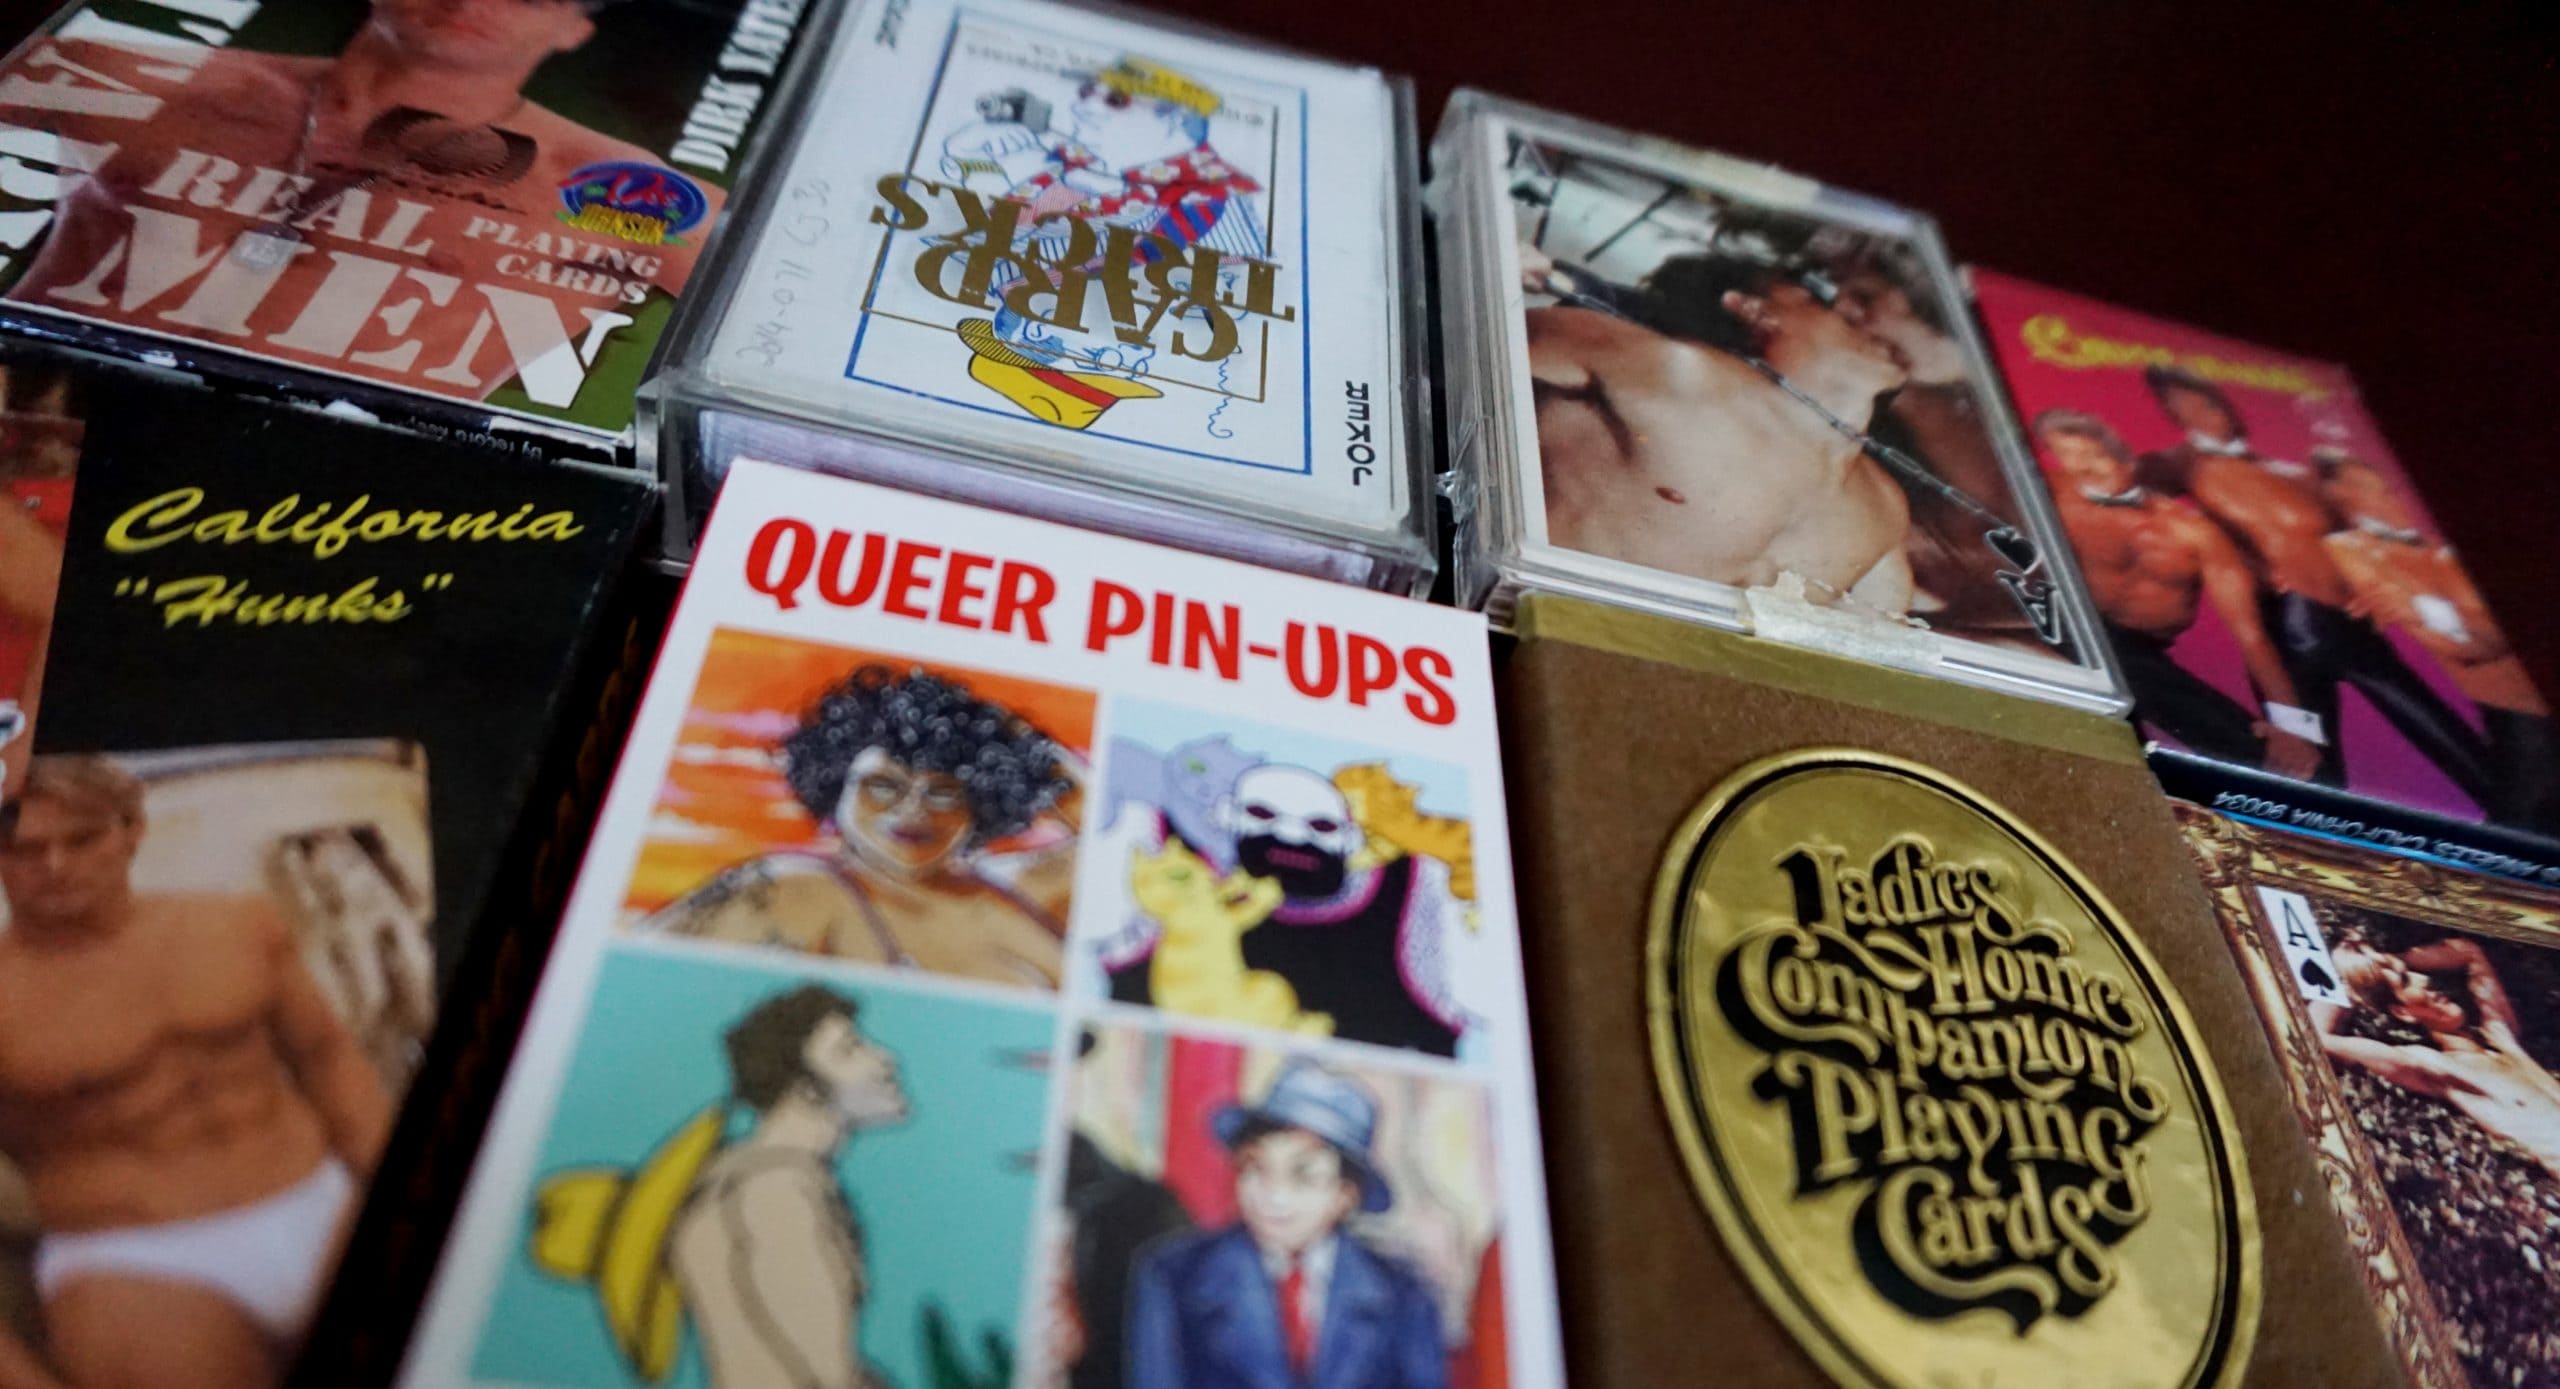 Eight decks of playing cards arranged 4x2 on a table. Queer Pin-Ups and Ladies Home Companion Playing Cards are in focus in the foreground.